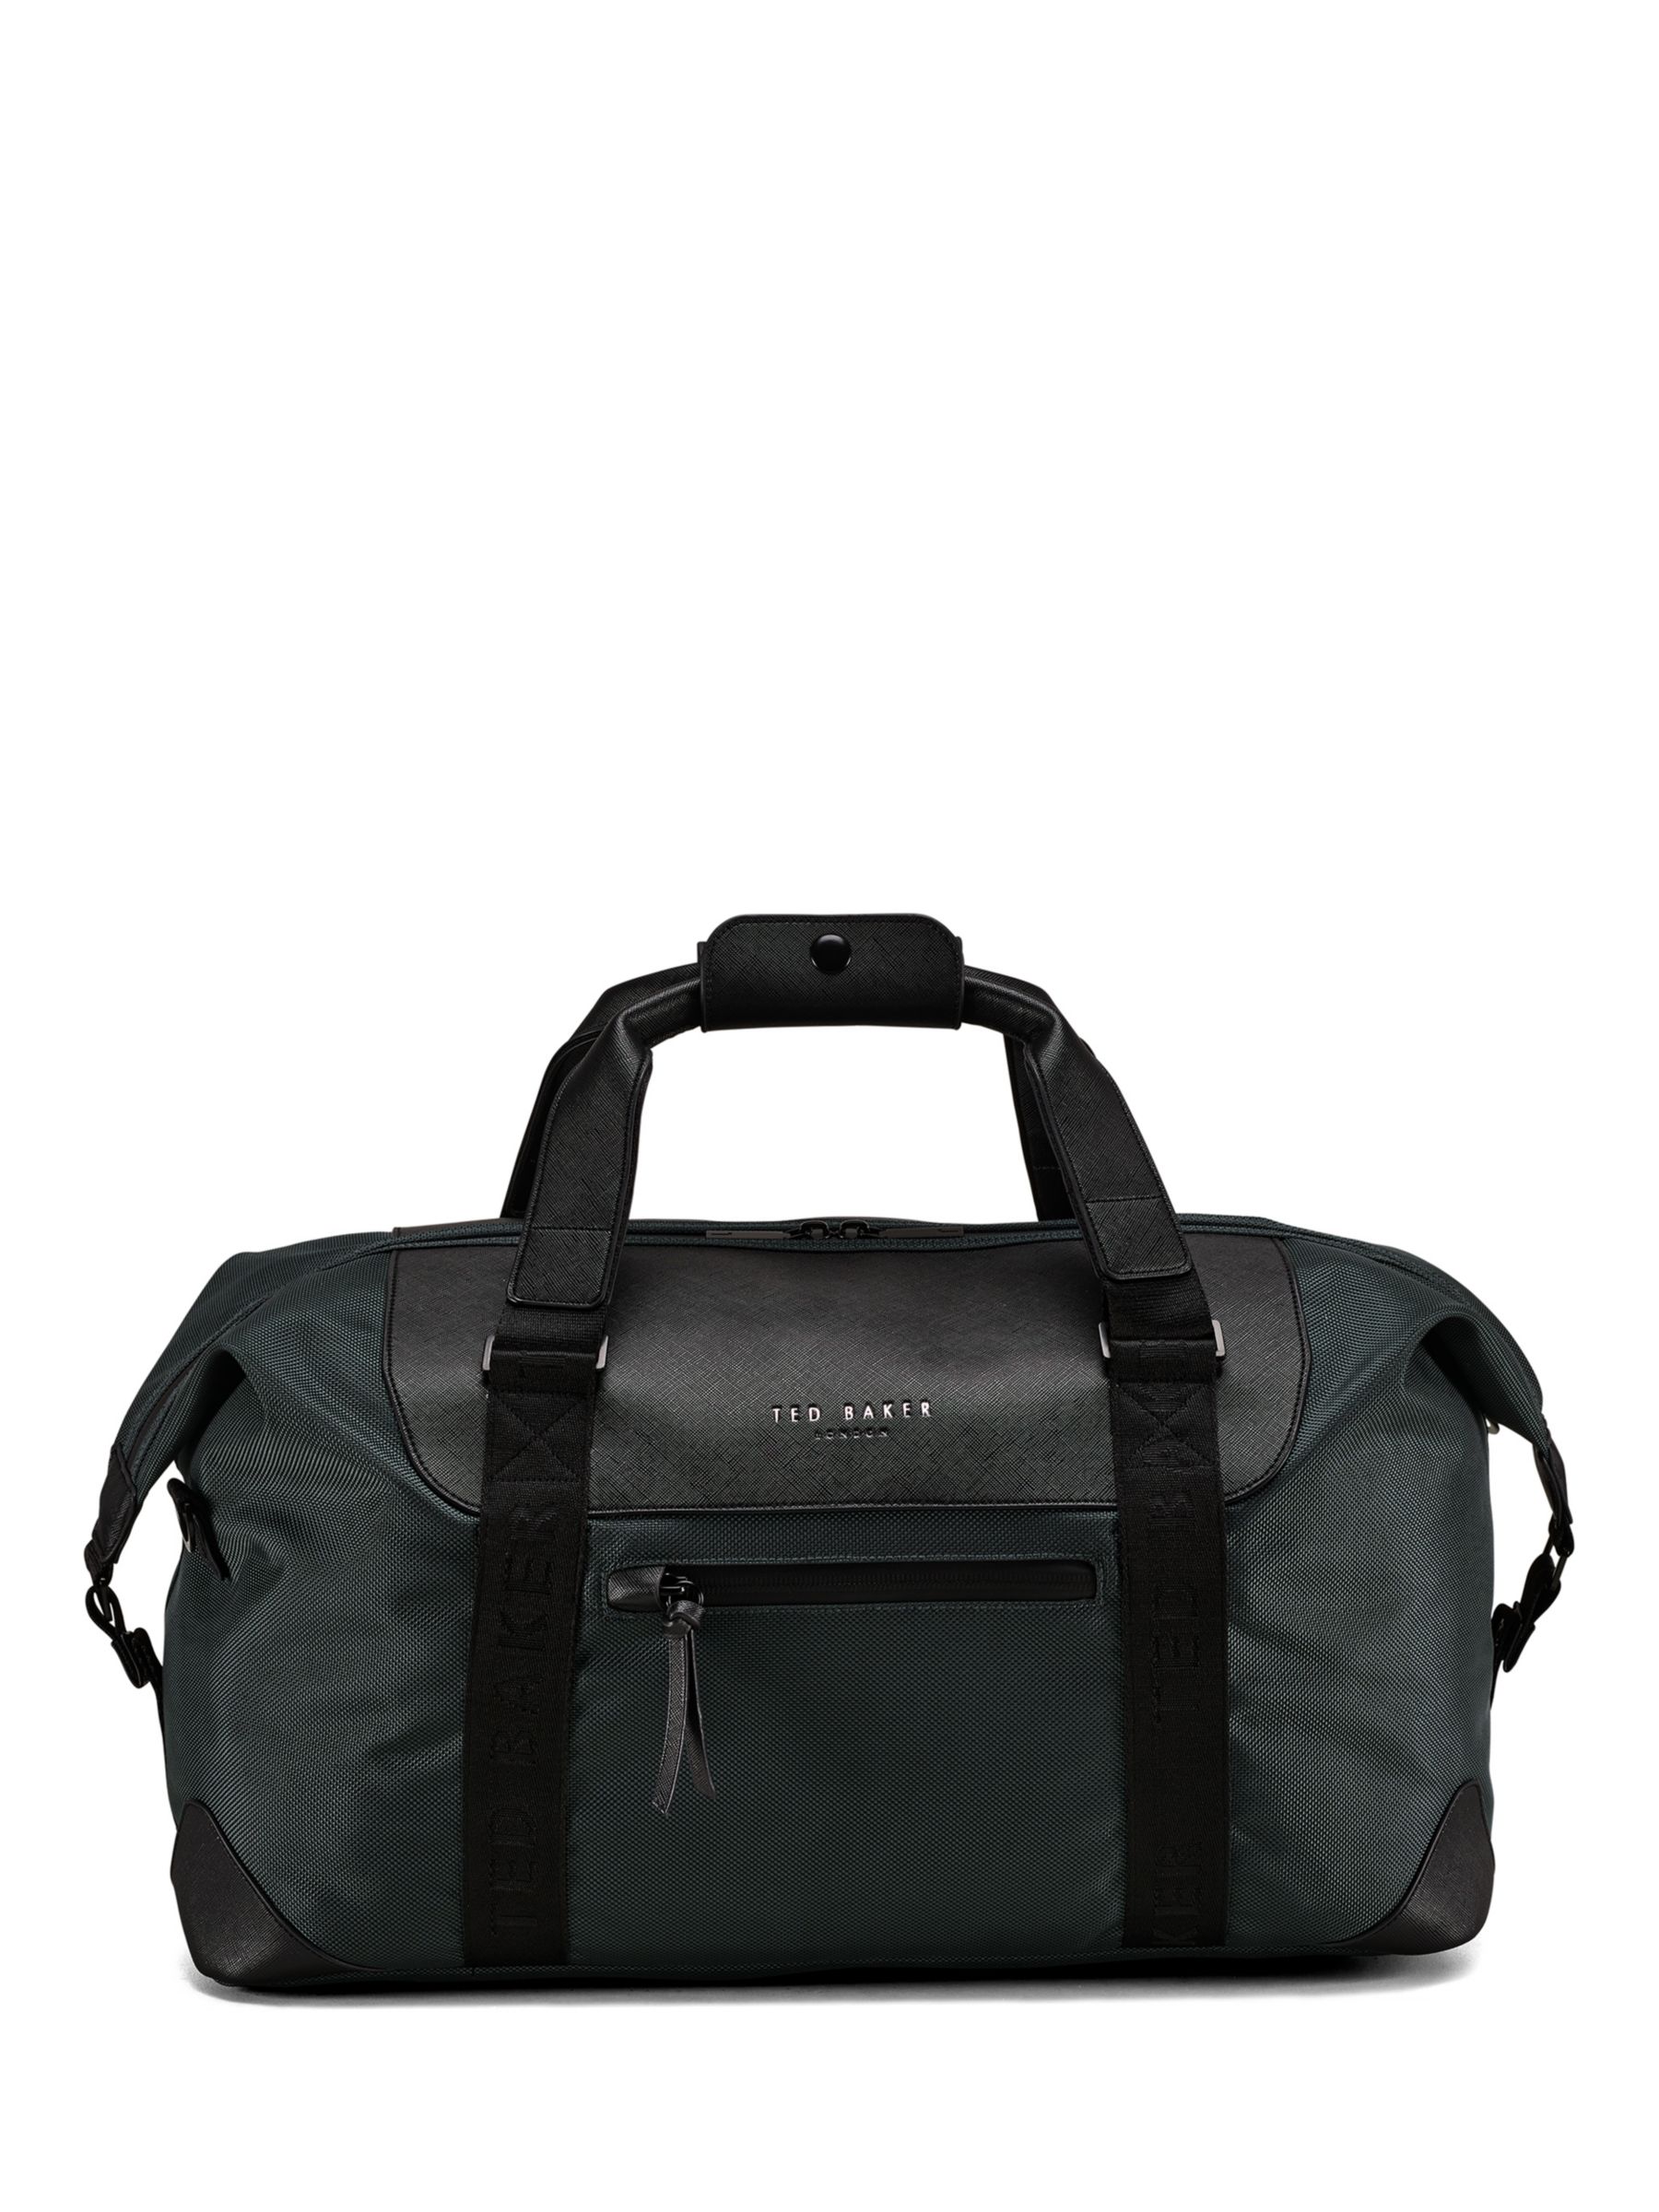 Ted Baker Nomad Small Duffle Bag, 24L, Pewter Grey at John Lewis & Partners